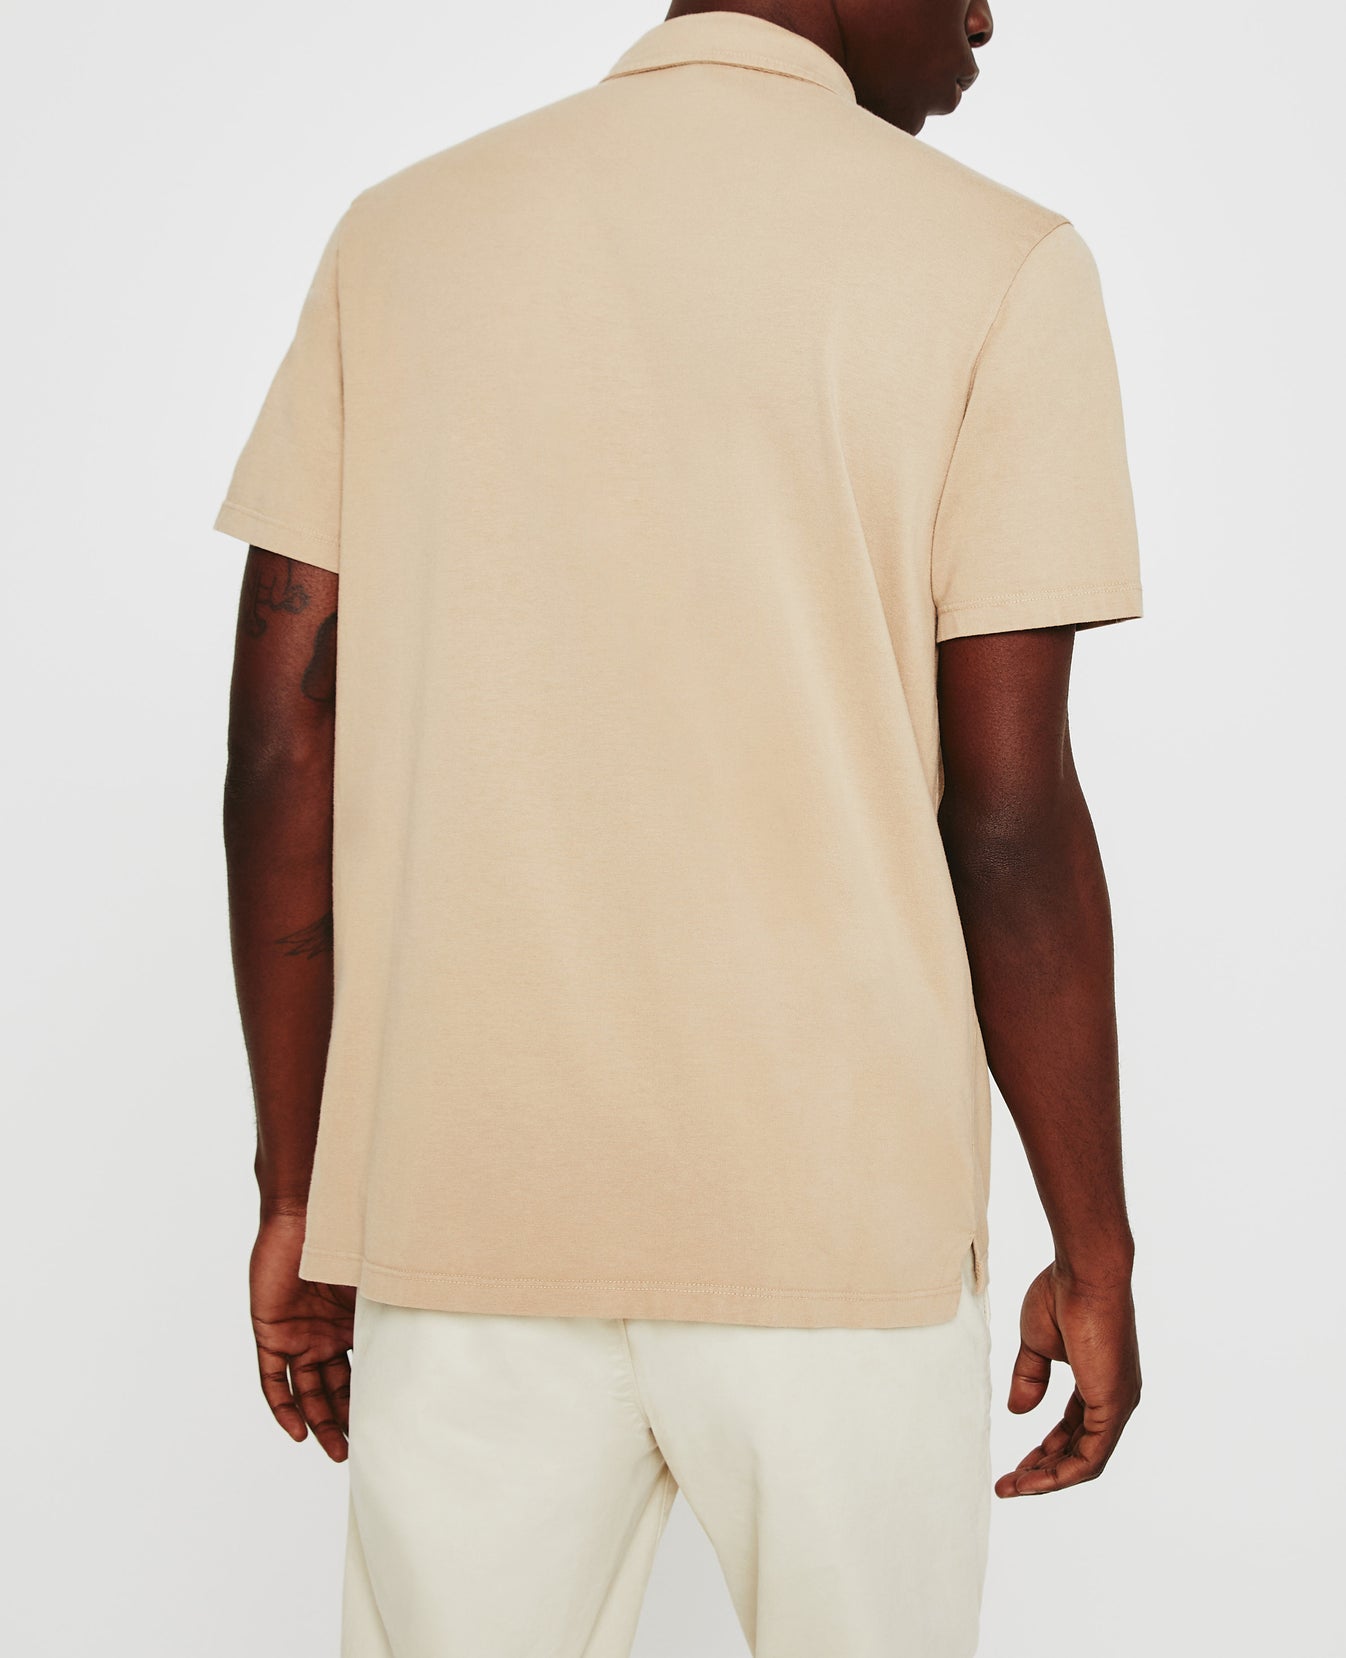 Bryce Polo Studio Taupe Mens Top Photo 6